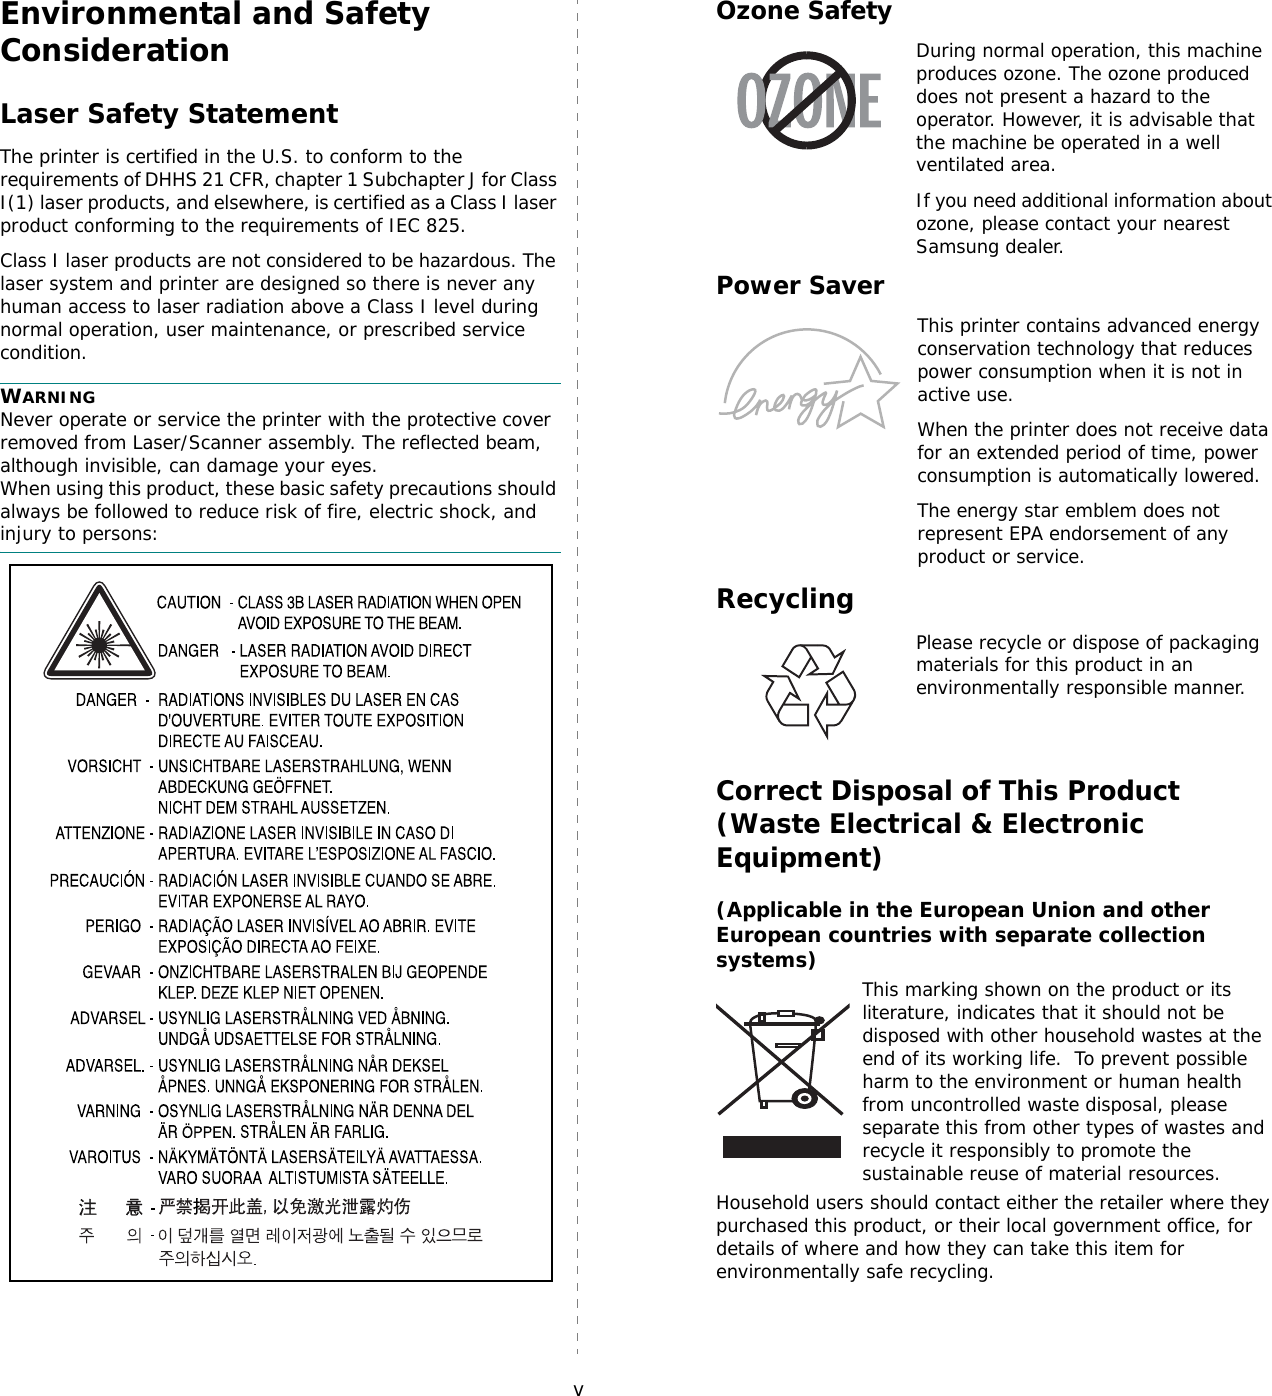 vEnvironmental and Safety ConsiderationLaser Safety StatementThe printer is certified in the U.S. to conform to the requirements of DHHS 21 CFR, chapter 1 Subchapter J for Class I(1) laser products, and elsewhere, is certified as a Class I laser product conforming to the requirements of IEC 825.Class I laser products are not considered to be hazardous. The laser system and printer are designed so there is never any human access to laser radiation above a Class I level during normal operation, user maintenance, or prescribed service condition.WARNING Never operate or service the printer with the protective cover removed from Laser/Scanner assembly. The reflected beam, although invisible, can damage your eyes.When using this product, these basic safety precautions should always be followed to reduce risk of fire, electric shock, and injury to persons:Ozone SafetyDuring normal operation, this machine produces ozone. The ozone produced does not present a hazard to the operator. However, it is advisable that the machine be operated in a well ventilated area.If you need additional information about ozone, please contact your nearest Samsung dealer.Power SaverThis printer contains advanced energy conservation technology that reduces power consumption when it is not in active use.When the printer does not receive data for an extended period of time, power consumption is automatically lowered. The energy star emblem does not represent EPA endorsement of any product or service.   RecyclingPlease recycle or dispose of packaging materials for this product in an environmentally responsible manner.Correct Disposal of This Product (Waste Electrical &amp; Electronic Equipment)(Applicable in the European Union and other European countries with separate collection systems)This marking shown on the product or its literature, indicates that it should not be disposed with other household wastes at the end of its working life.  To prevent possible harm to the environment or human health from uncontrolled waste disposal, please separate this from other types of wastes and recycle it responsibly to promote the sustainable reuse of material resources. Household users should contact either the retailer where they purchased this product, or their local government office, for details of where and how they can take this item for environmentally safe recycling. 